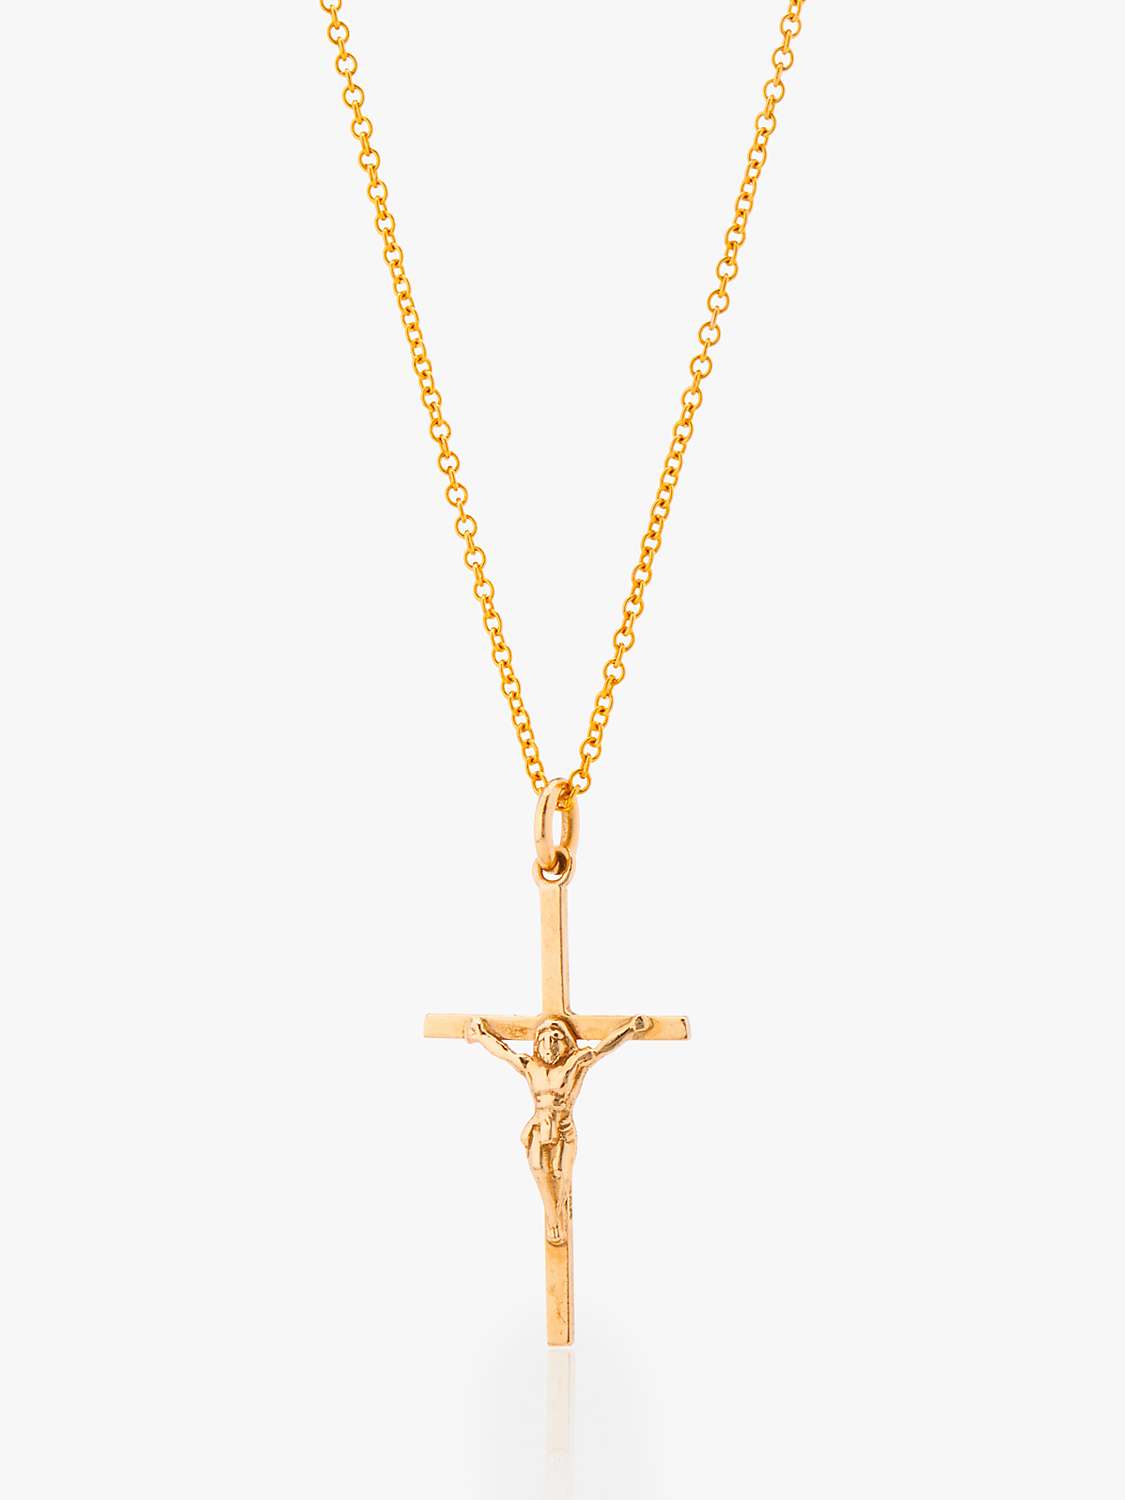 Buy L & T Heirlooms 9ct Yellow Gold Second Hand Crucifix Pendant Necklace Online at johnlewis.com